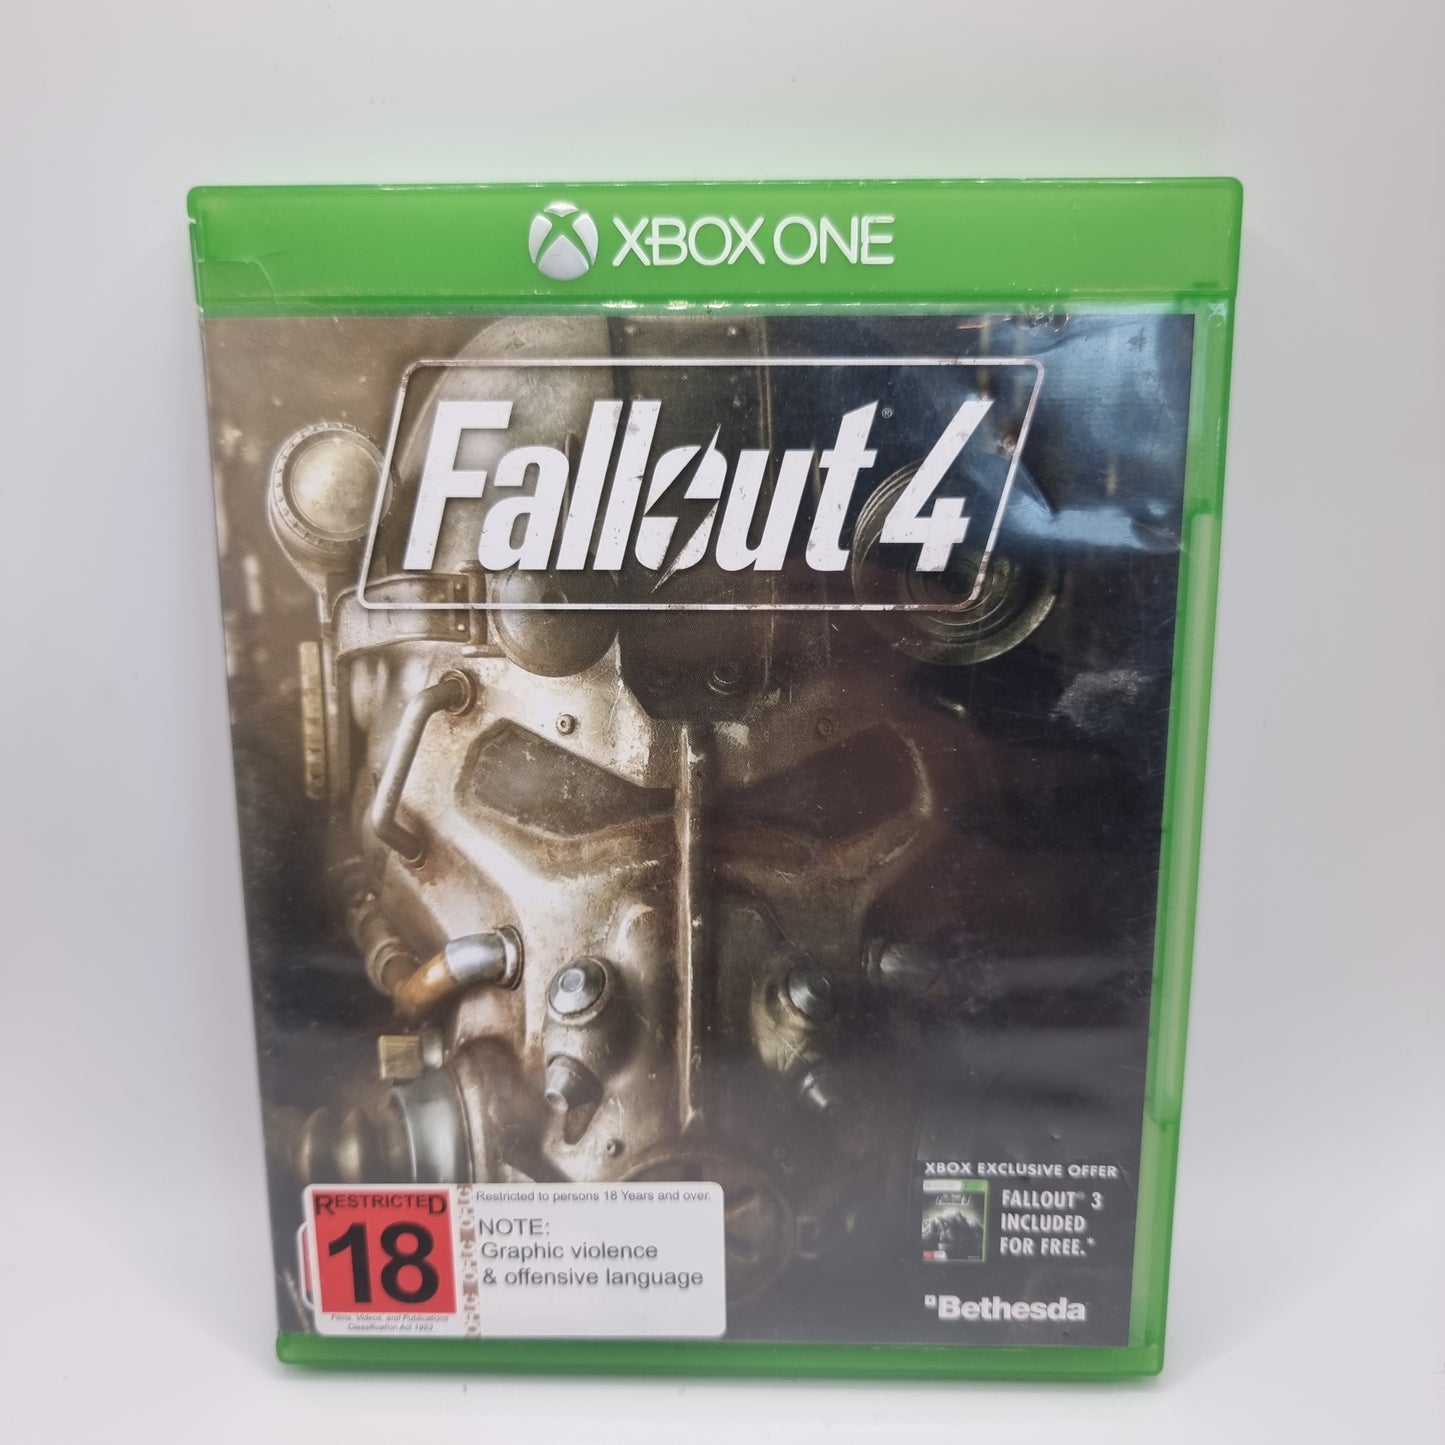 Fallout 4 Xbox One Game